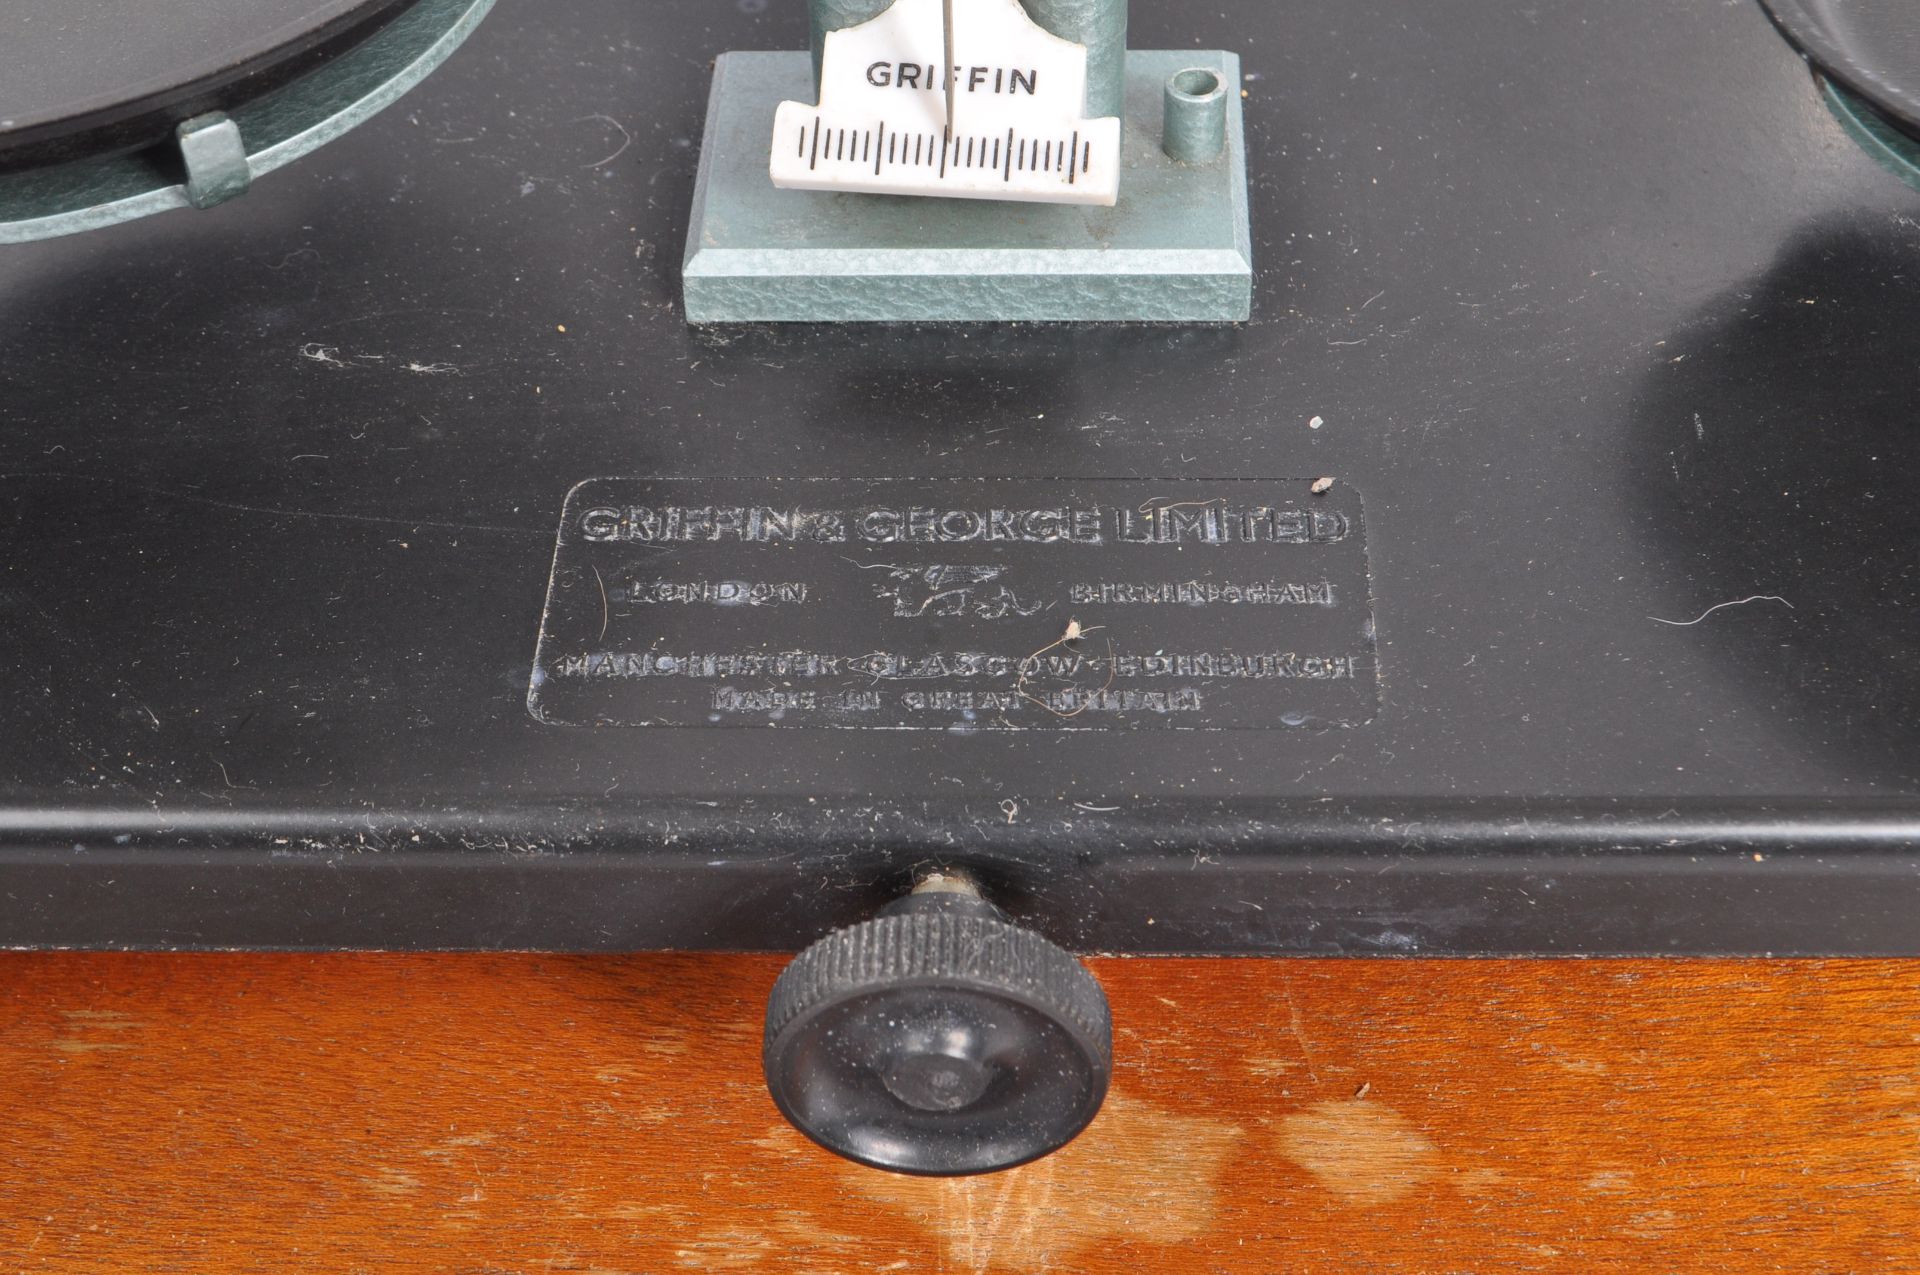 GRIFFIN & GEORGE OAK CASED SCIENTIFIC BALANCE SCALES - Image 7 of 7